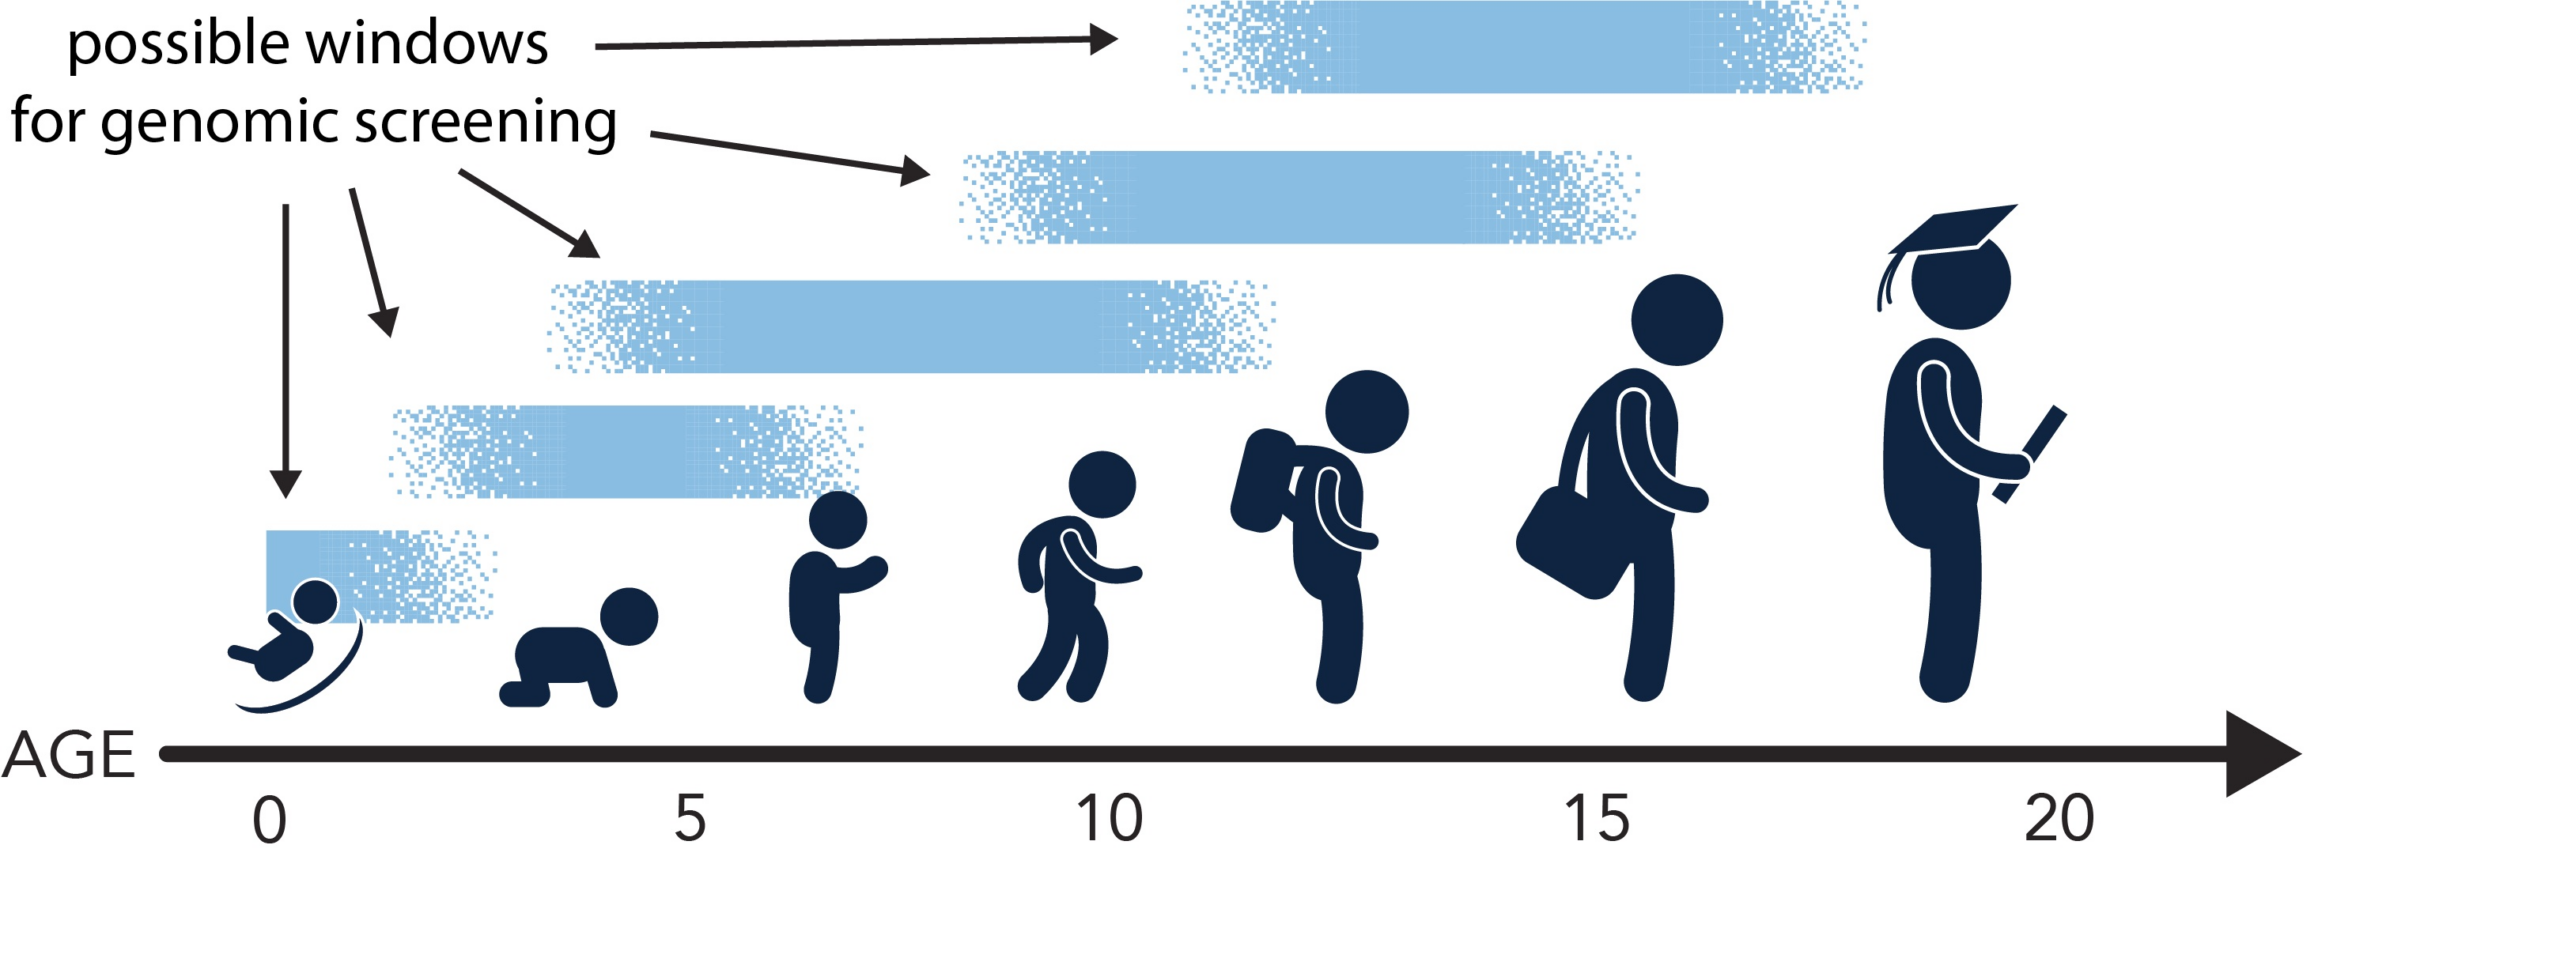 Stick figures at different age points going from: infant, toddler, small child, child, older child, teenager, and young adult/graduating adult.